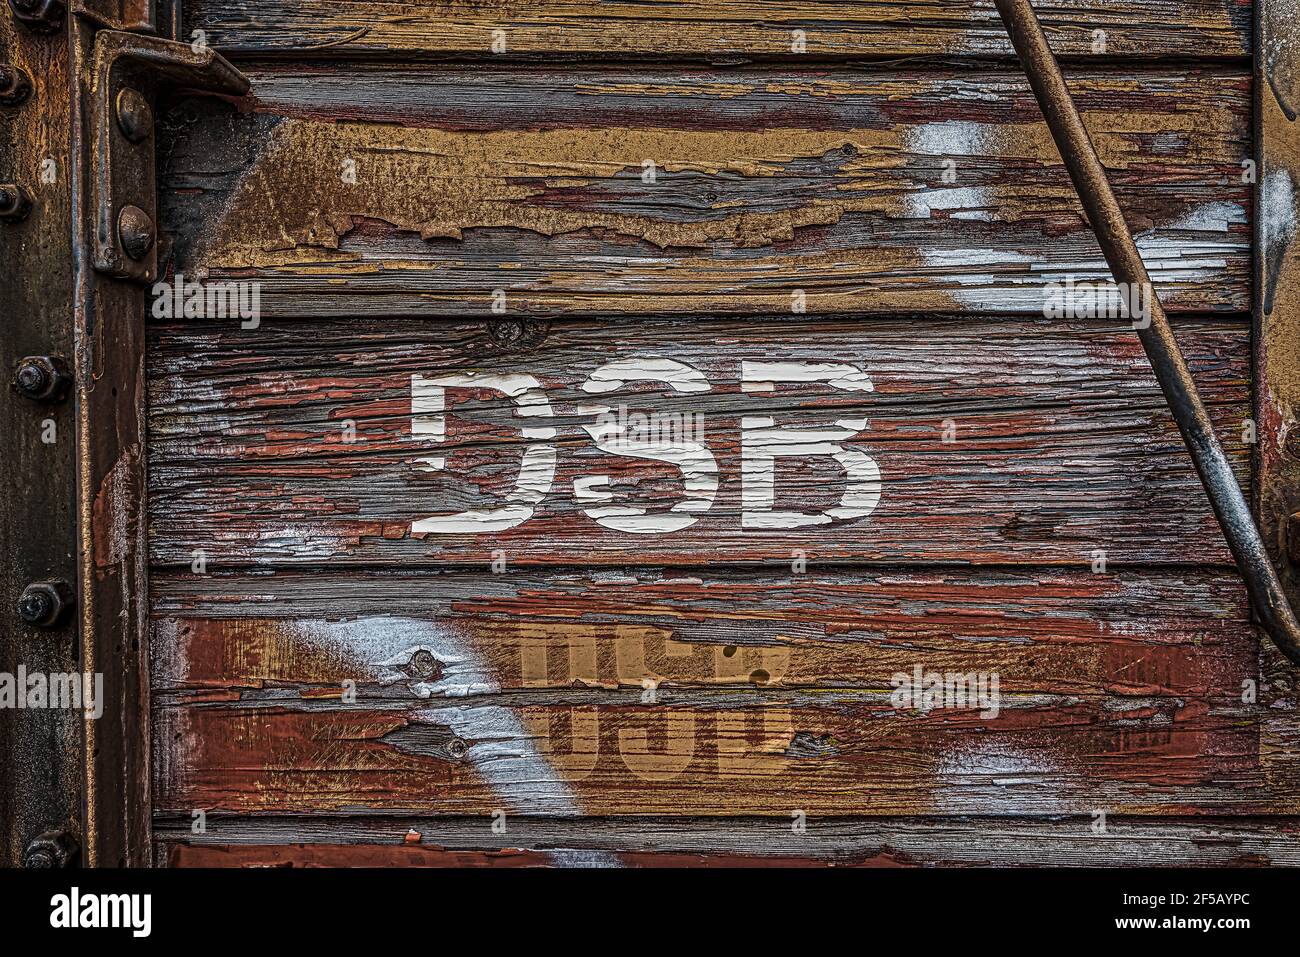 detail of old wagon with peeled paint on the planks, Copenhagen, Mars 20, 2021 Stock Photo